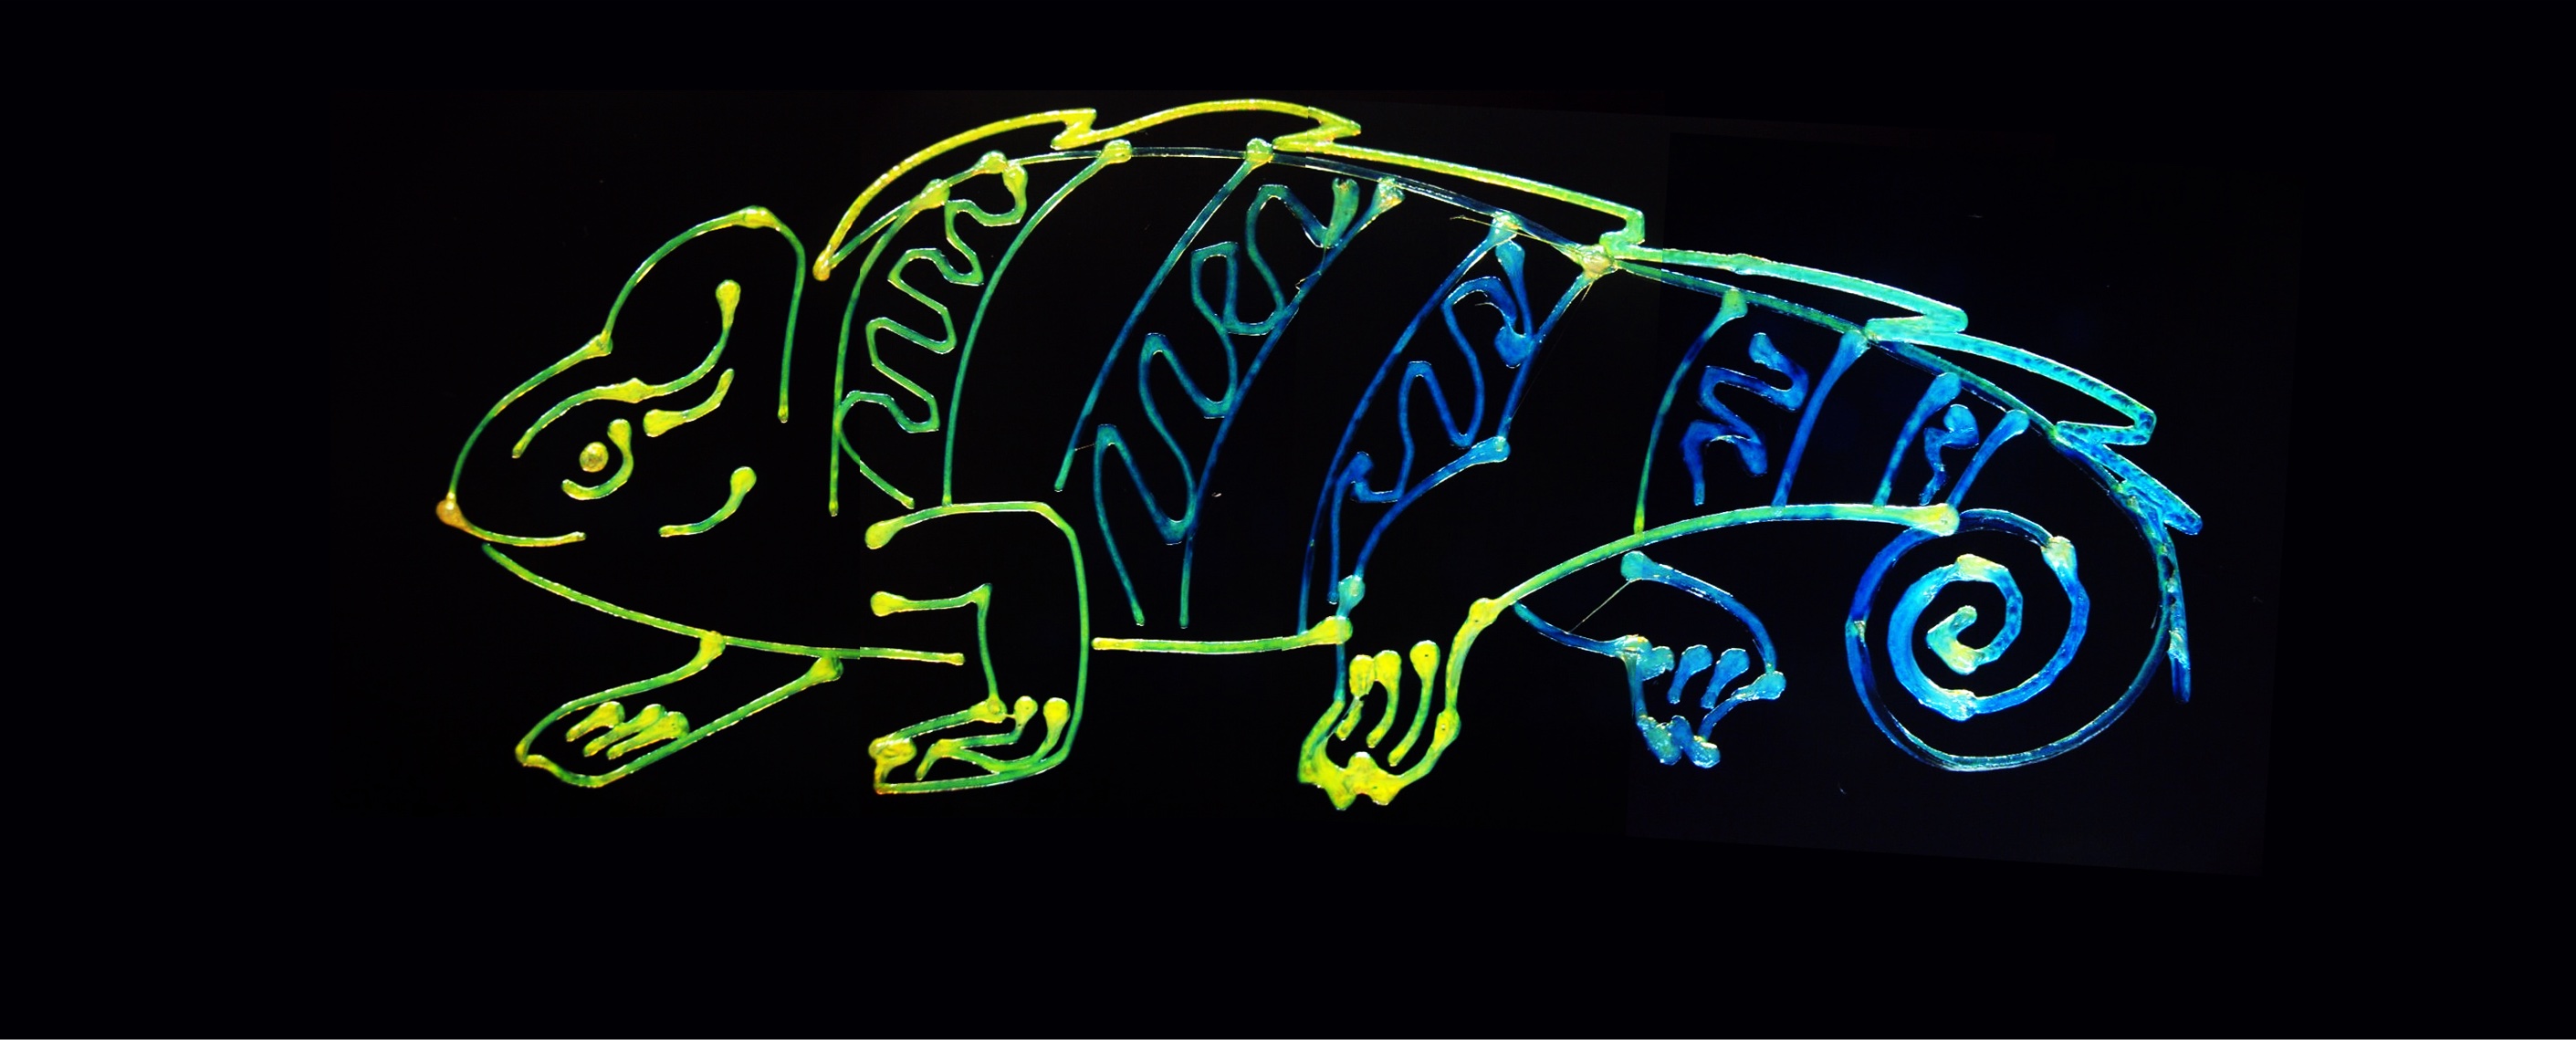 A 3D printed illustration of a chameleon on black background. Color gradient shifts from orange (at head) to blue (at tail).